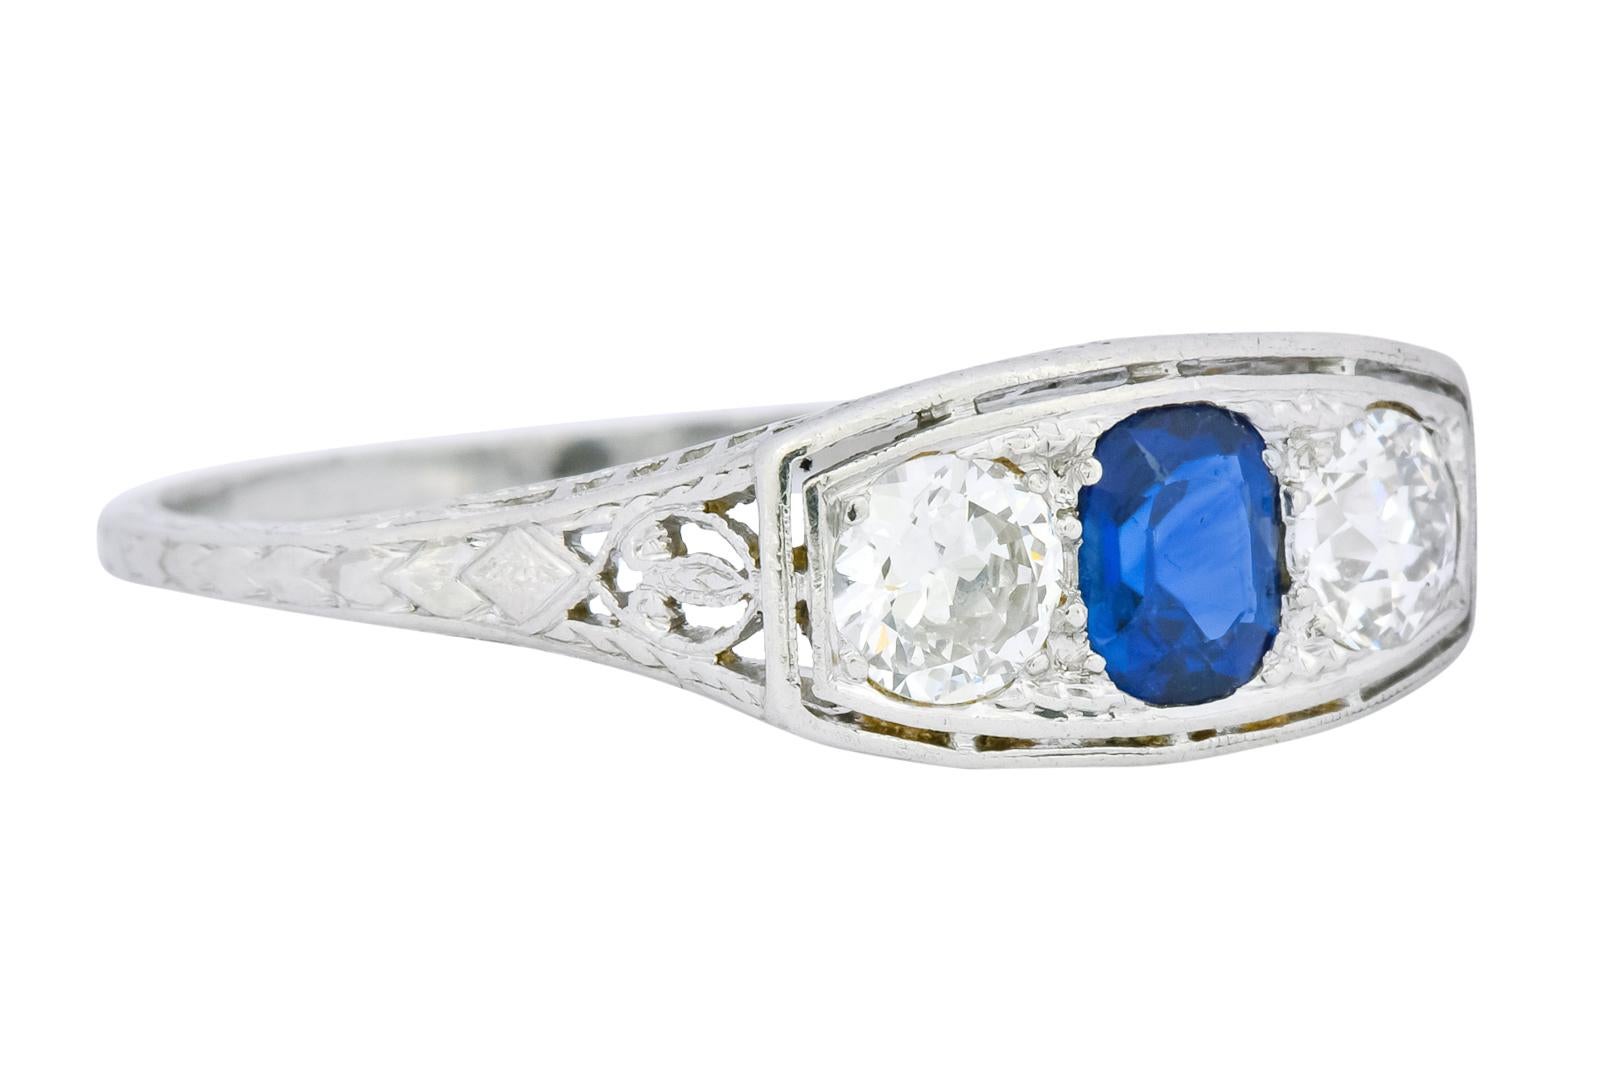 Centering an oval cut sapphire weighing approximately 0.60 carat, transparent and a brilliant royal blue color

Flanked by two old European cut diamonds weighing approximately 0.78 carat total, H/I color and VS clarity

Bead set, East to West, in a